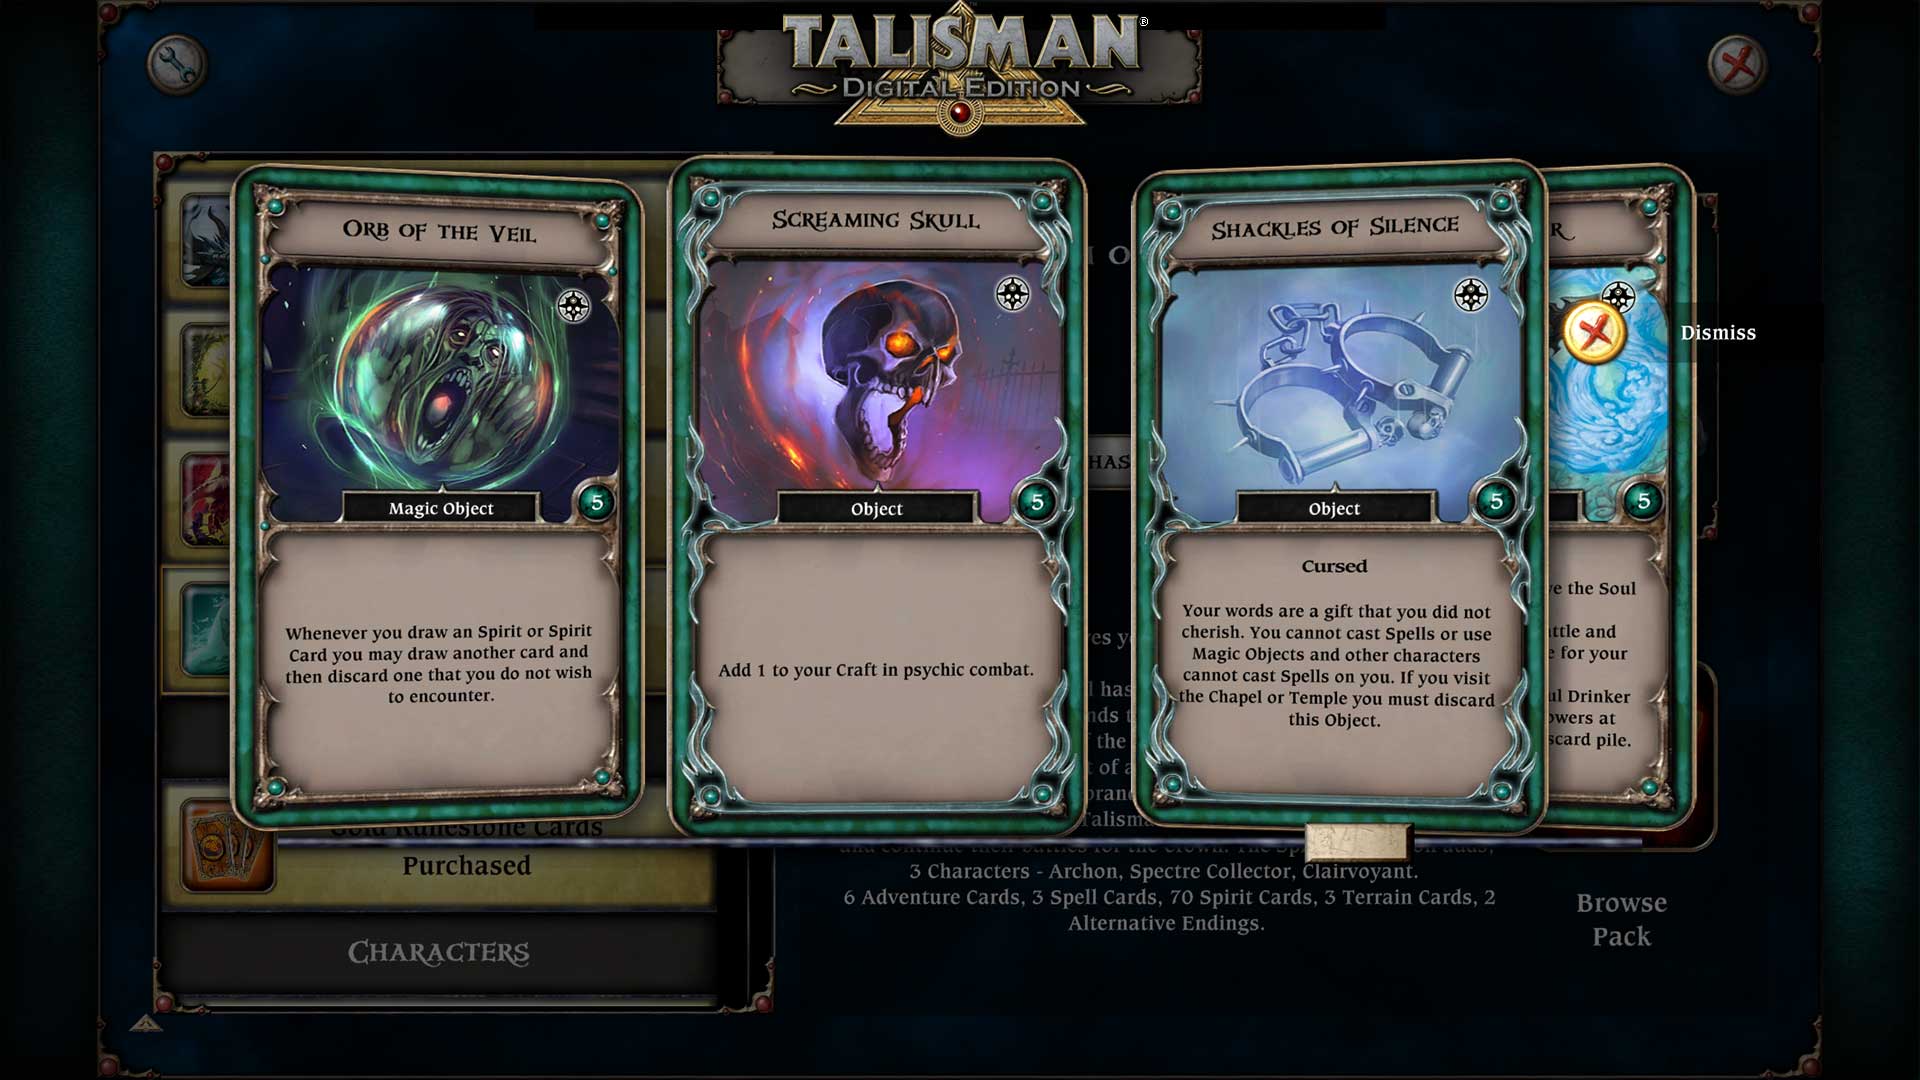 [$ 2.16] Talisman - The Realm of Souls Expansion DLC Steam CD Key